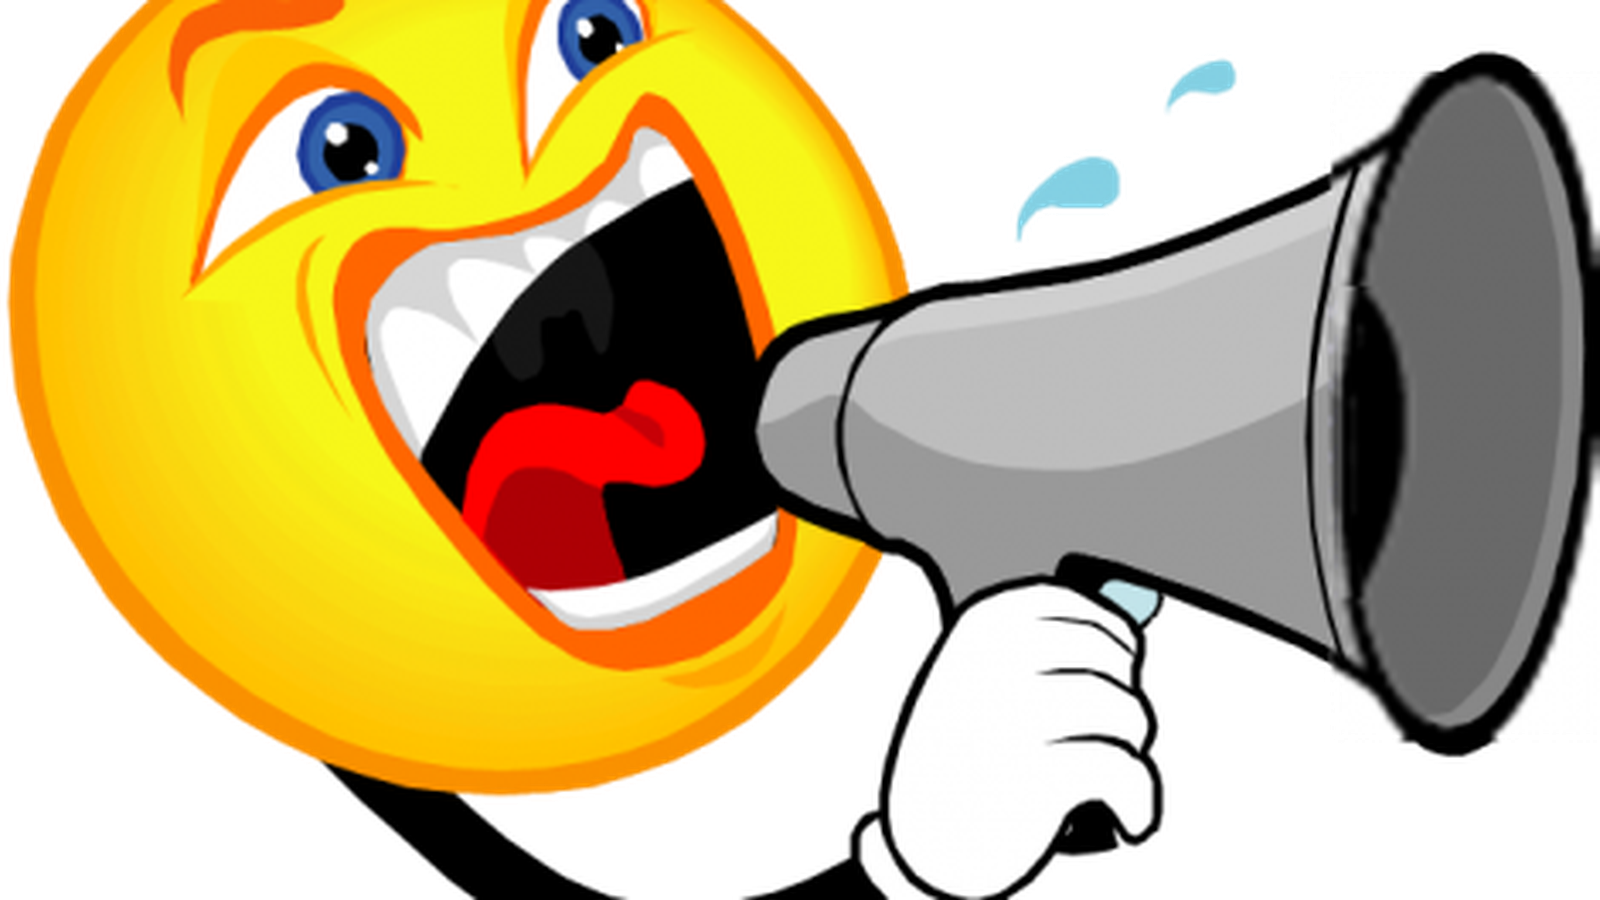 Megaphone clipart animation. Comments of the week